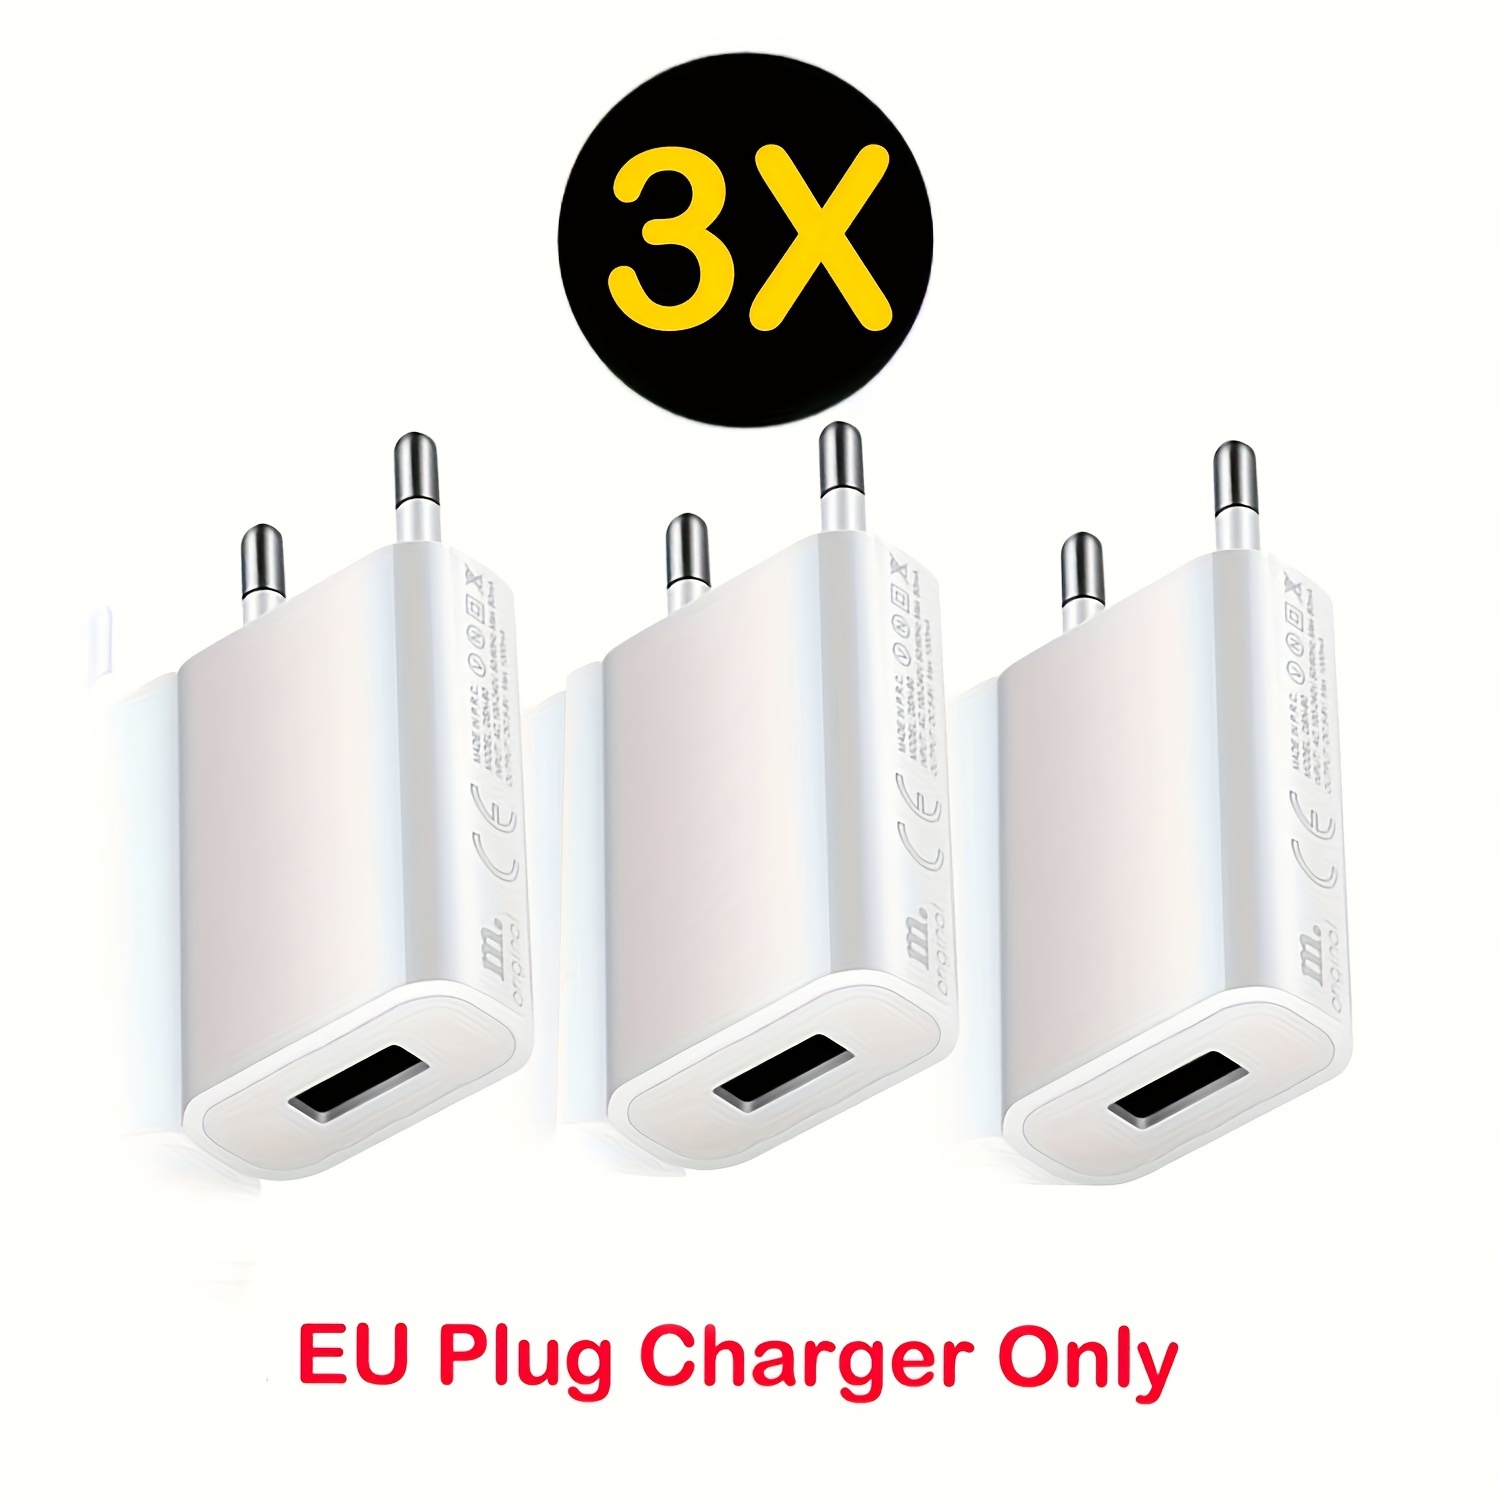 

3-pack Usb Wall Charger With European Plug, 5v 1a Output, Compact Travel Power Adapter, Universal Portable Charging Block For Smartphones And Usb Devices, 110-240v Compatible